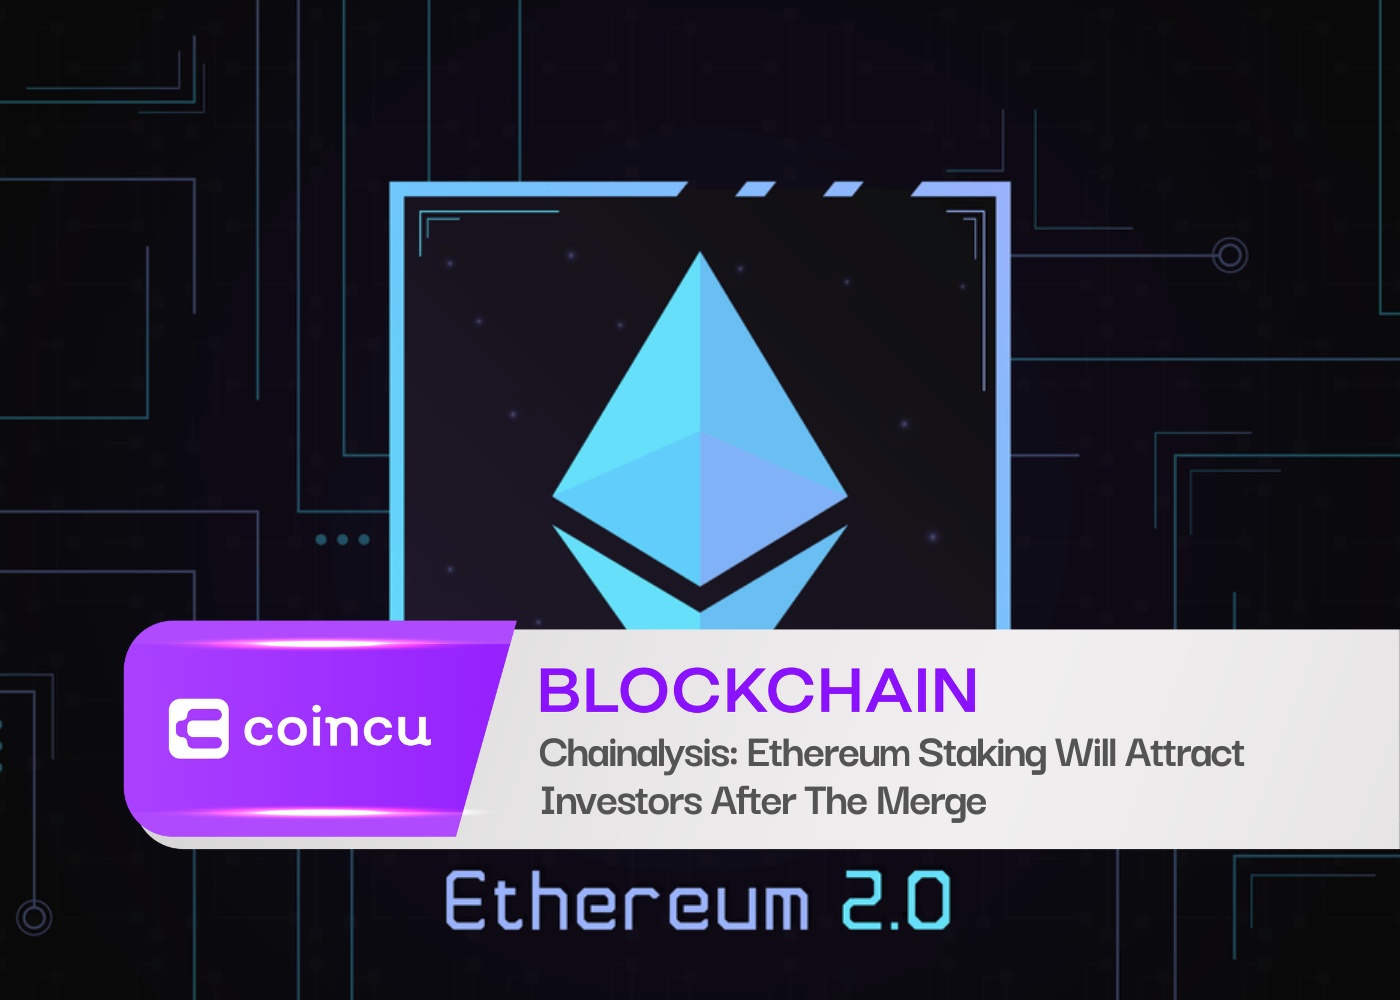 Chainalysis: Ethereum Staking Will Attract Investors After The Merge